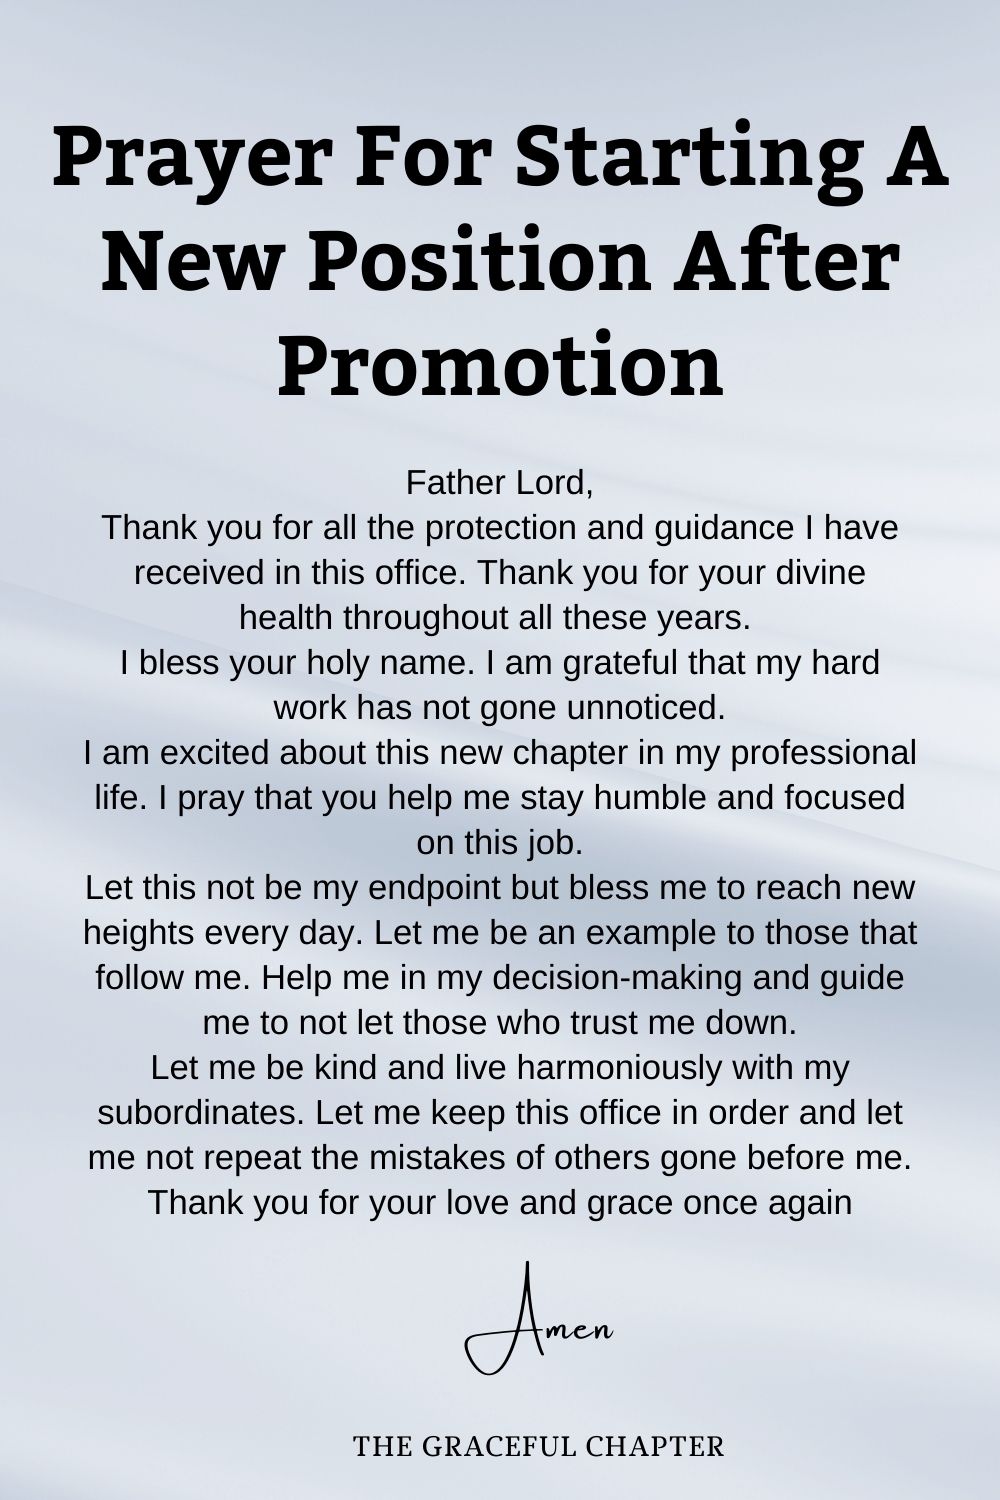 Prayer for starting a new position after promotion